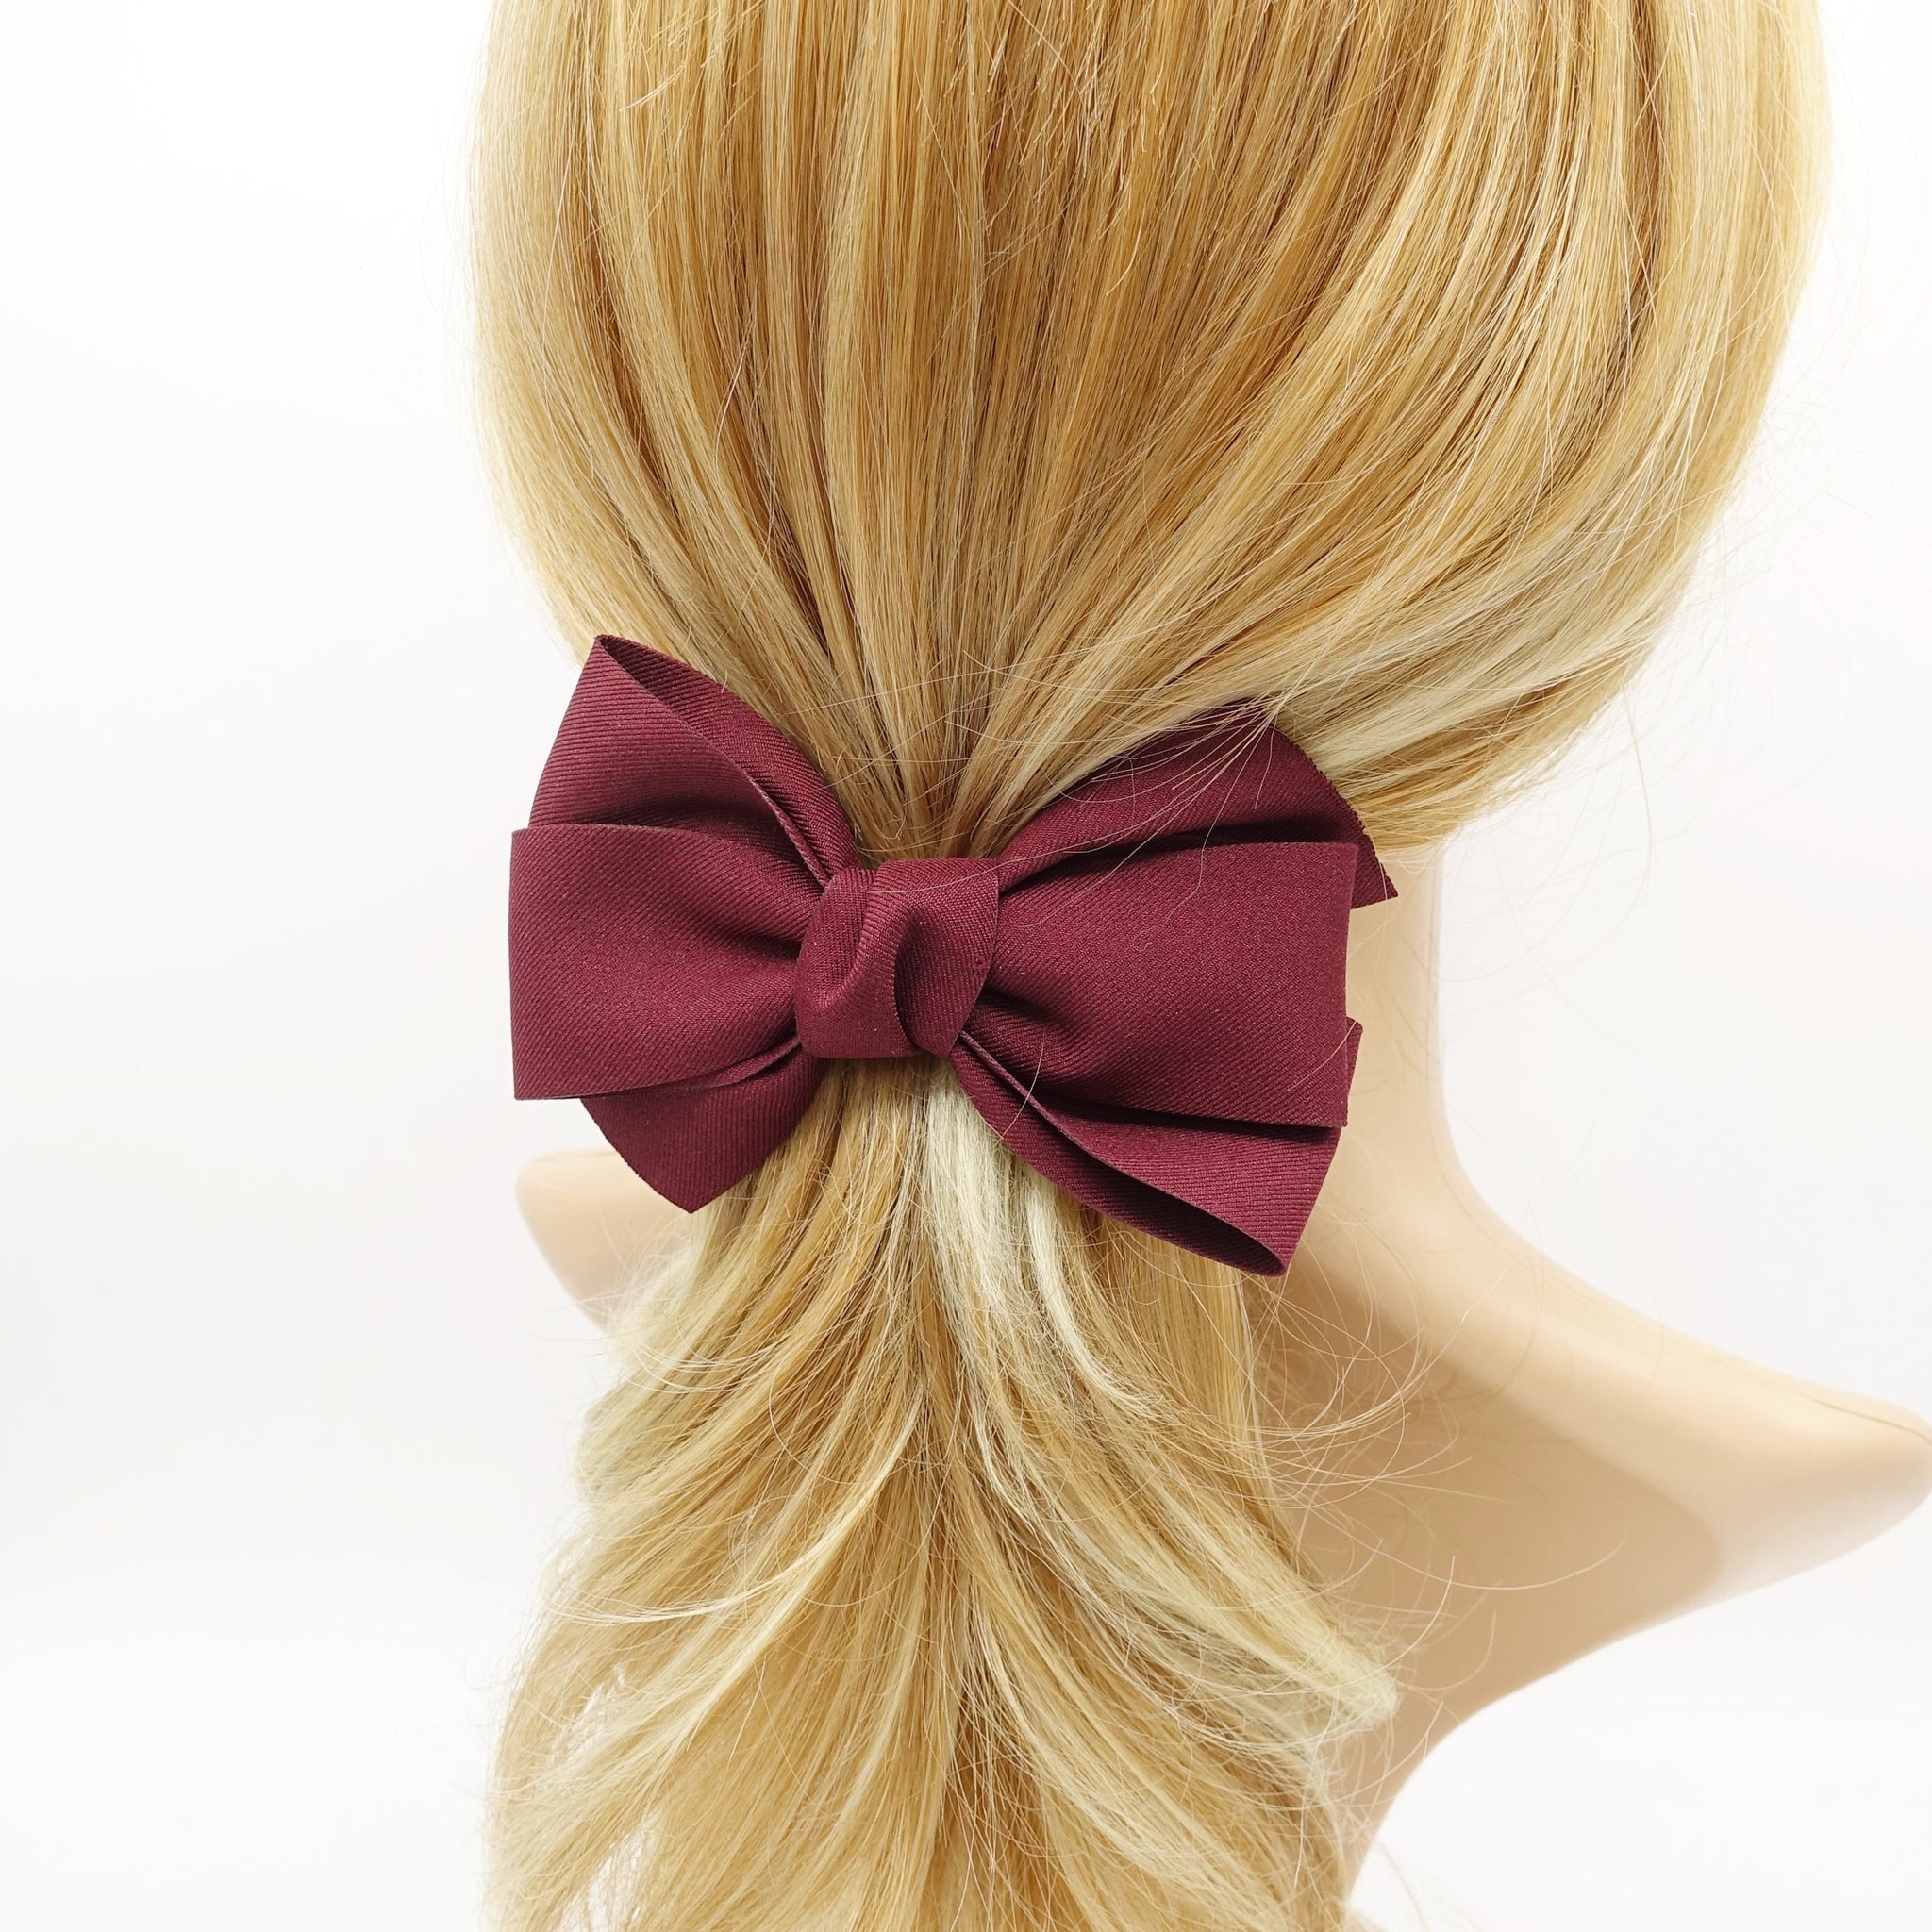 VeryShine claw/banana/barrette Red wine three wing casual hair bow daily hair accessory for women